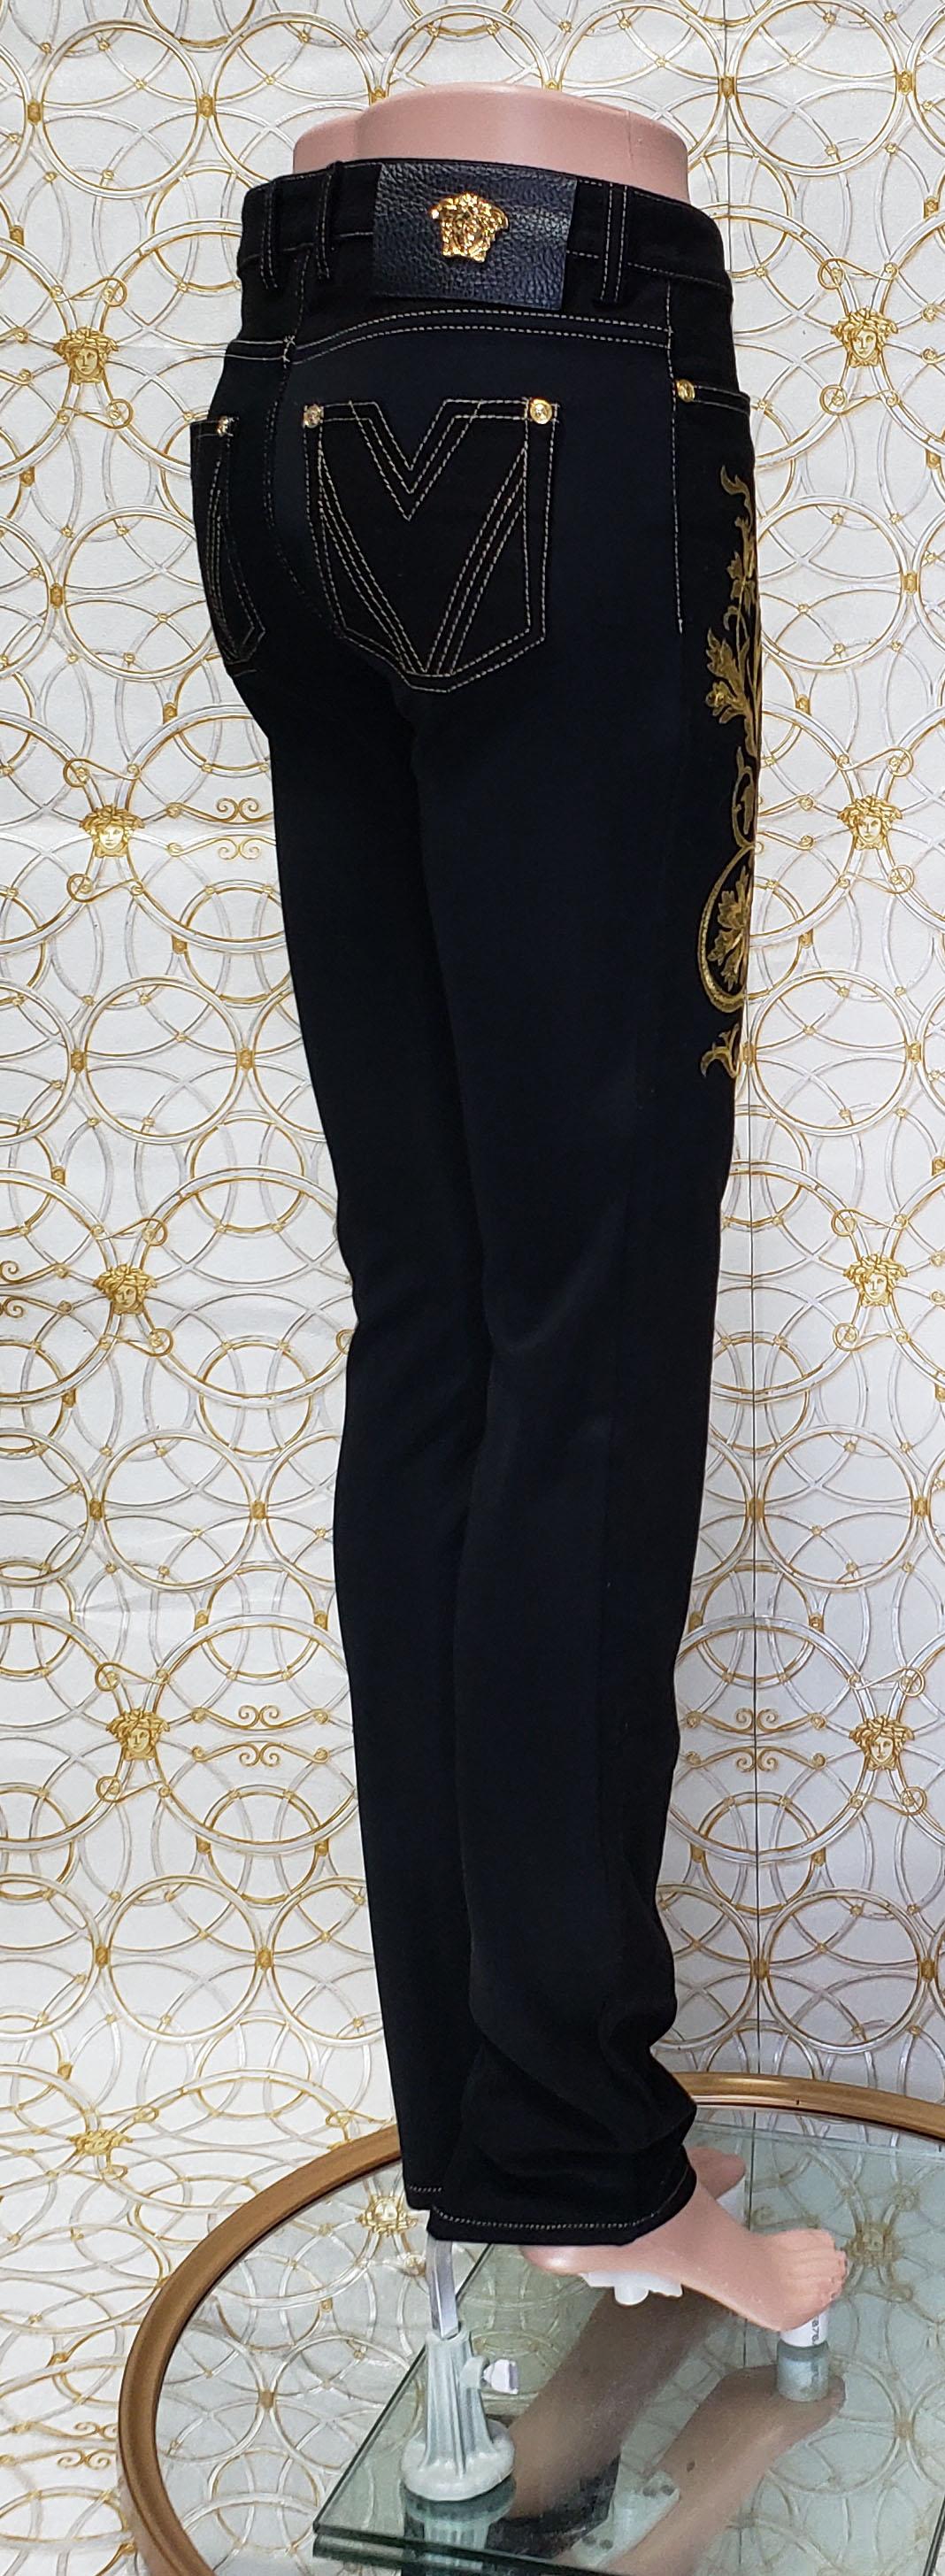 Pre-Fall 2013 L # 2 BRAND NEW VERSACE BAROQUE GOLD EMBROIDERED JEANS size 26 For Sale 4